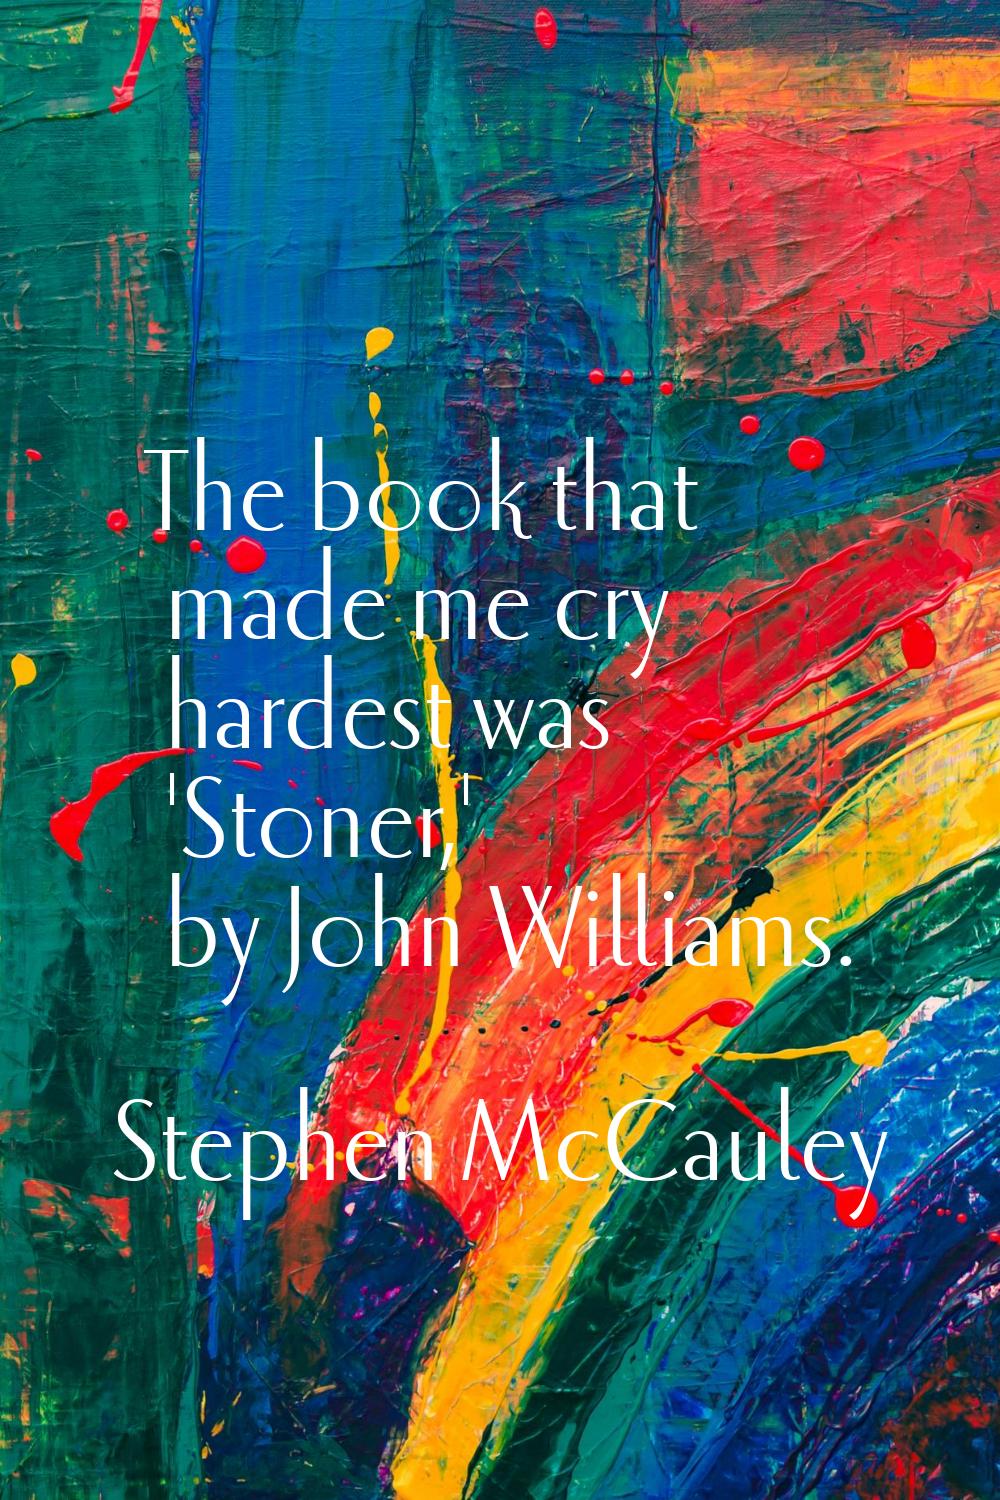 The book that made me cry hardest was 'Stoner,' by John Williams.